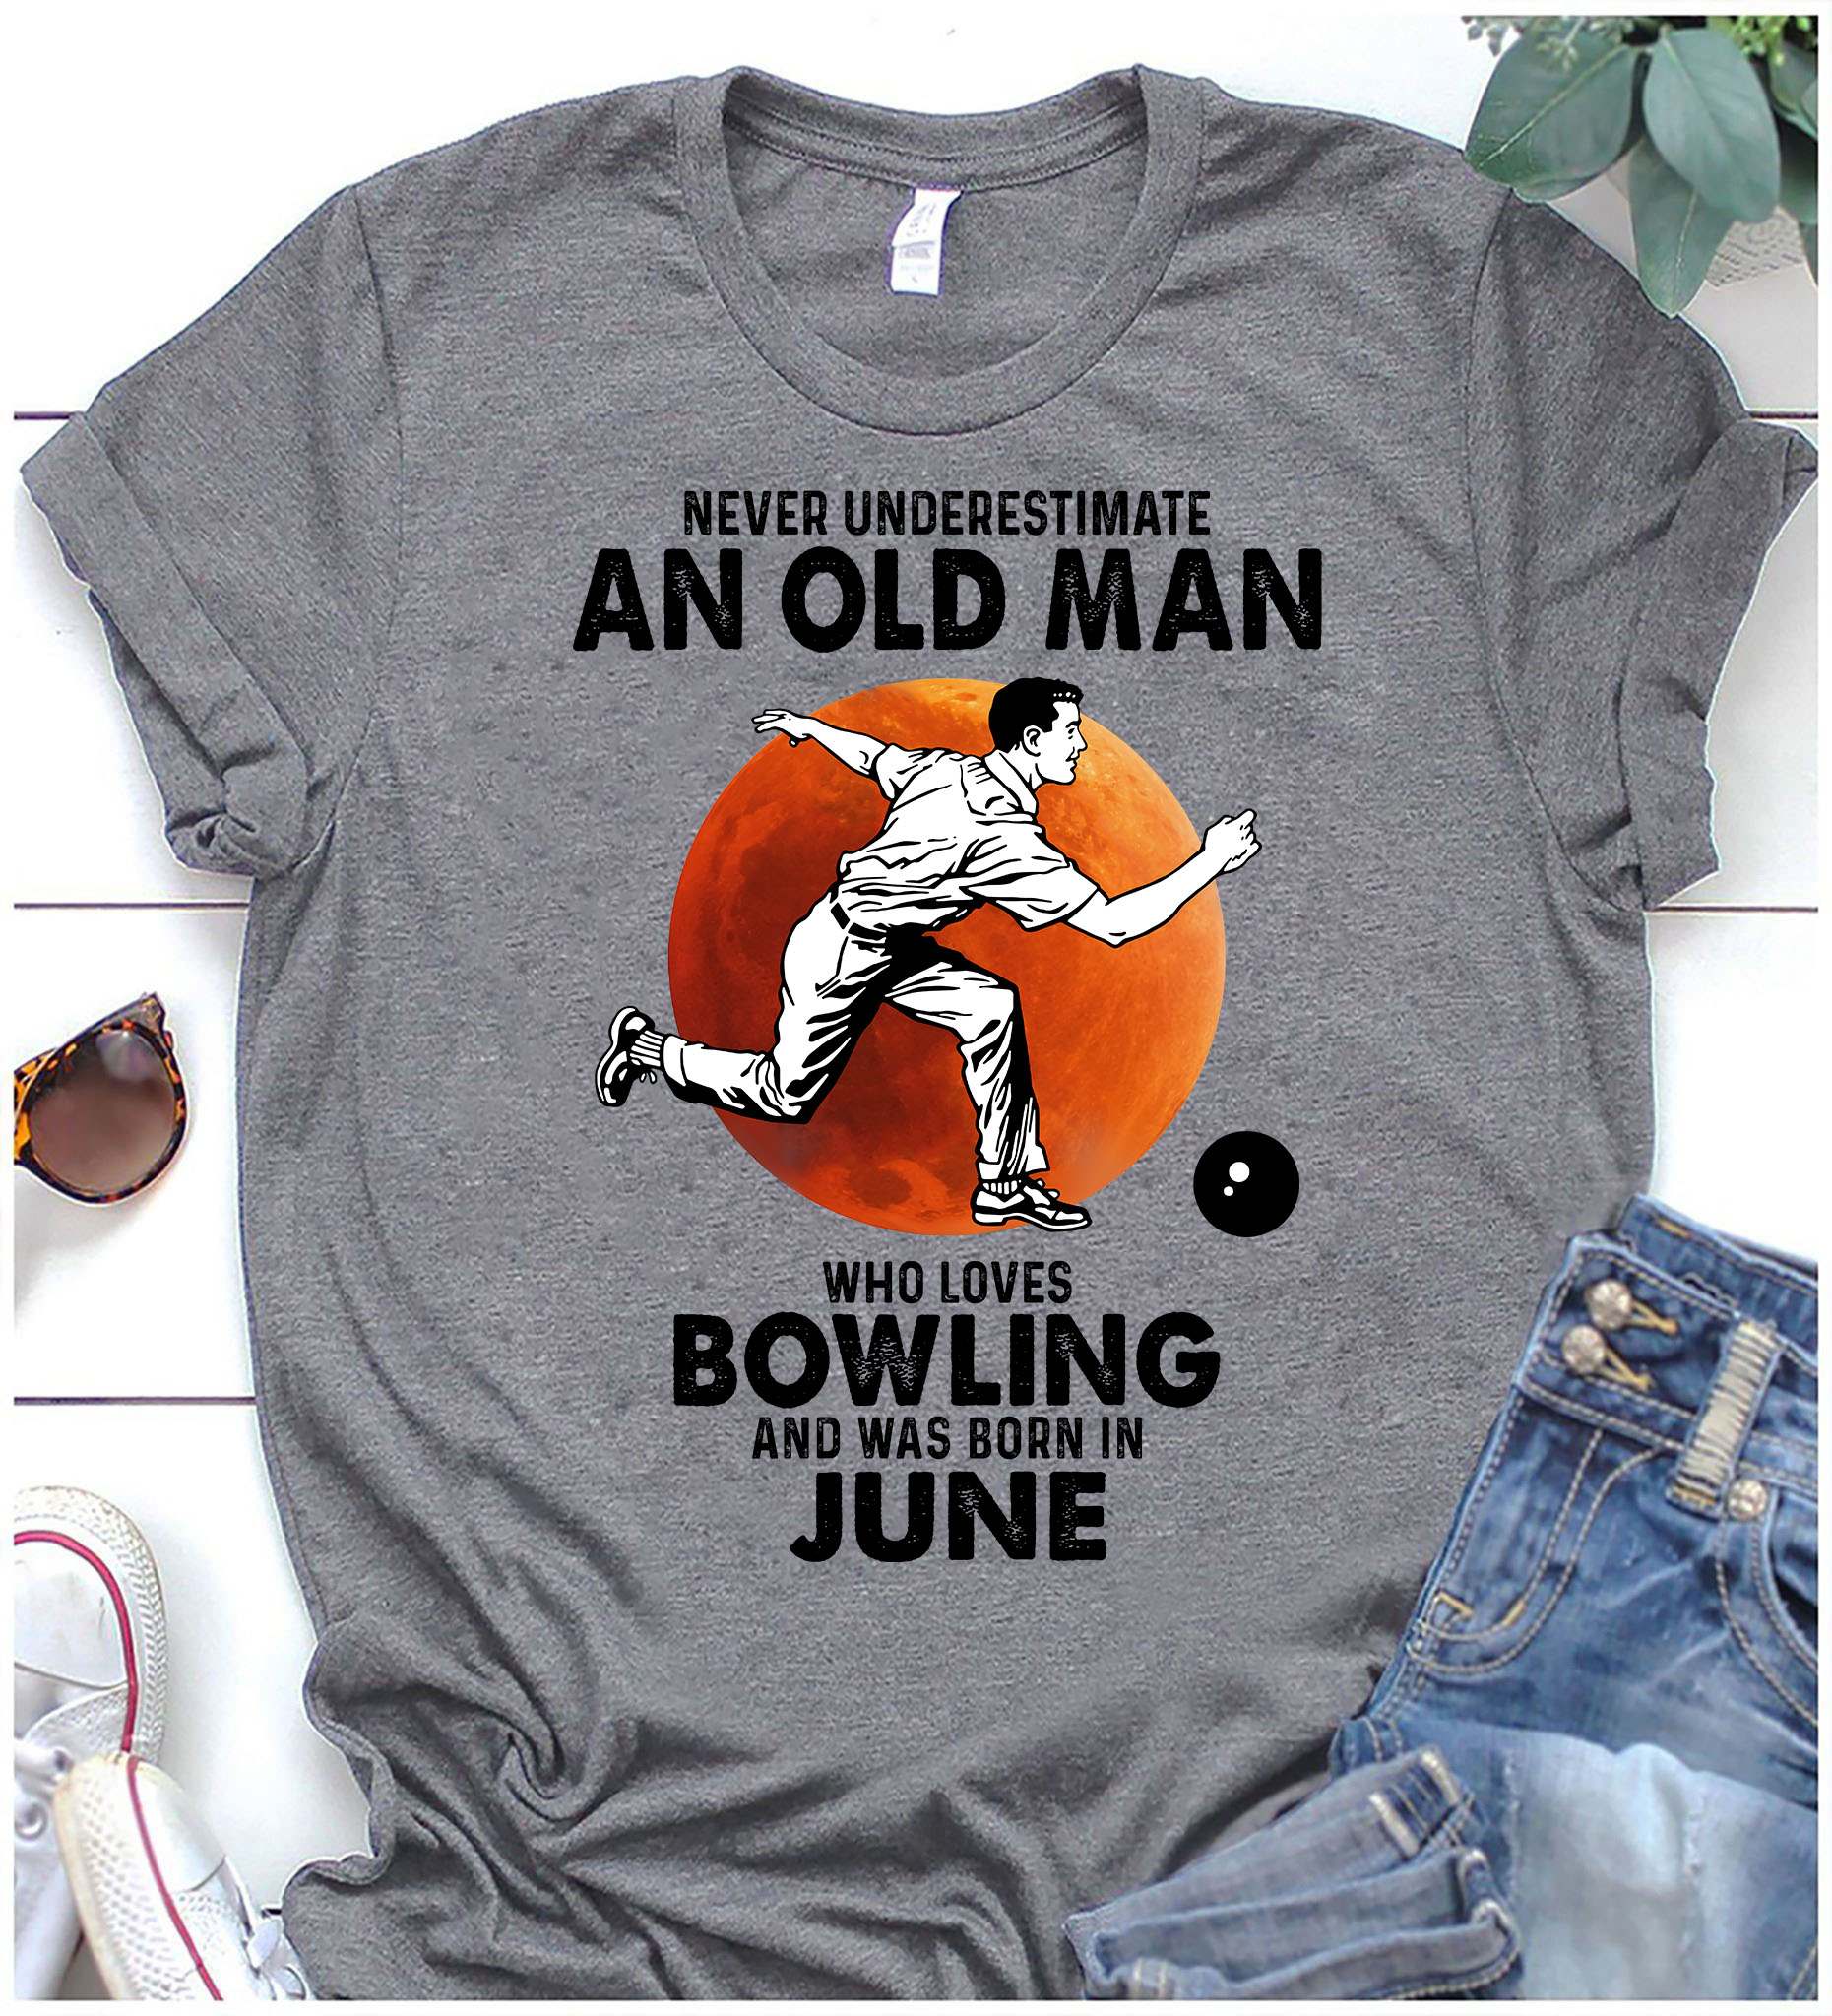 Never underestimate an old man who loves bowling and was born in June